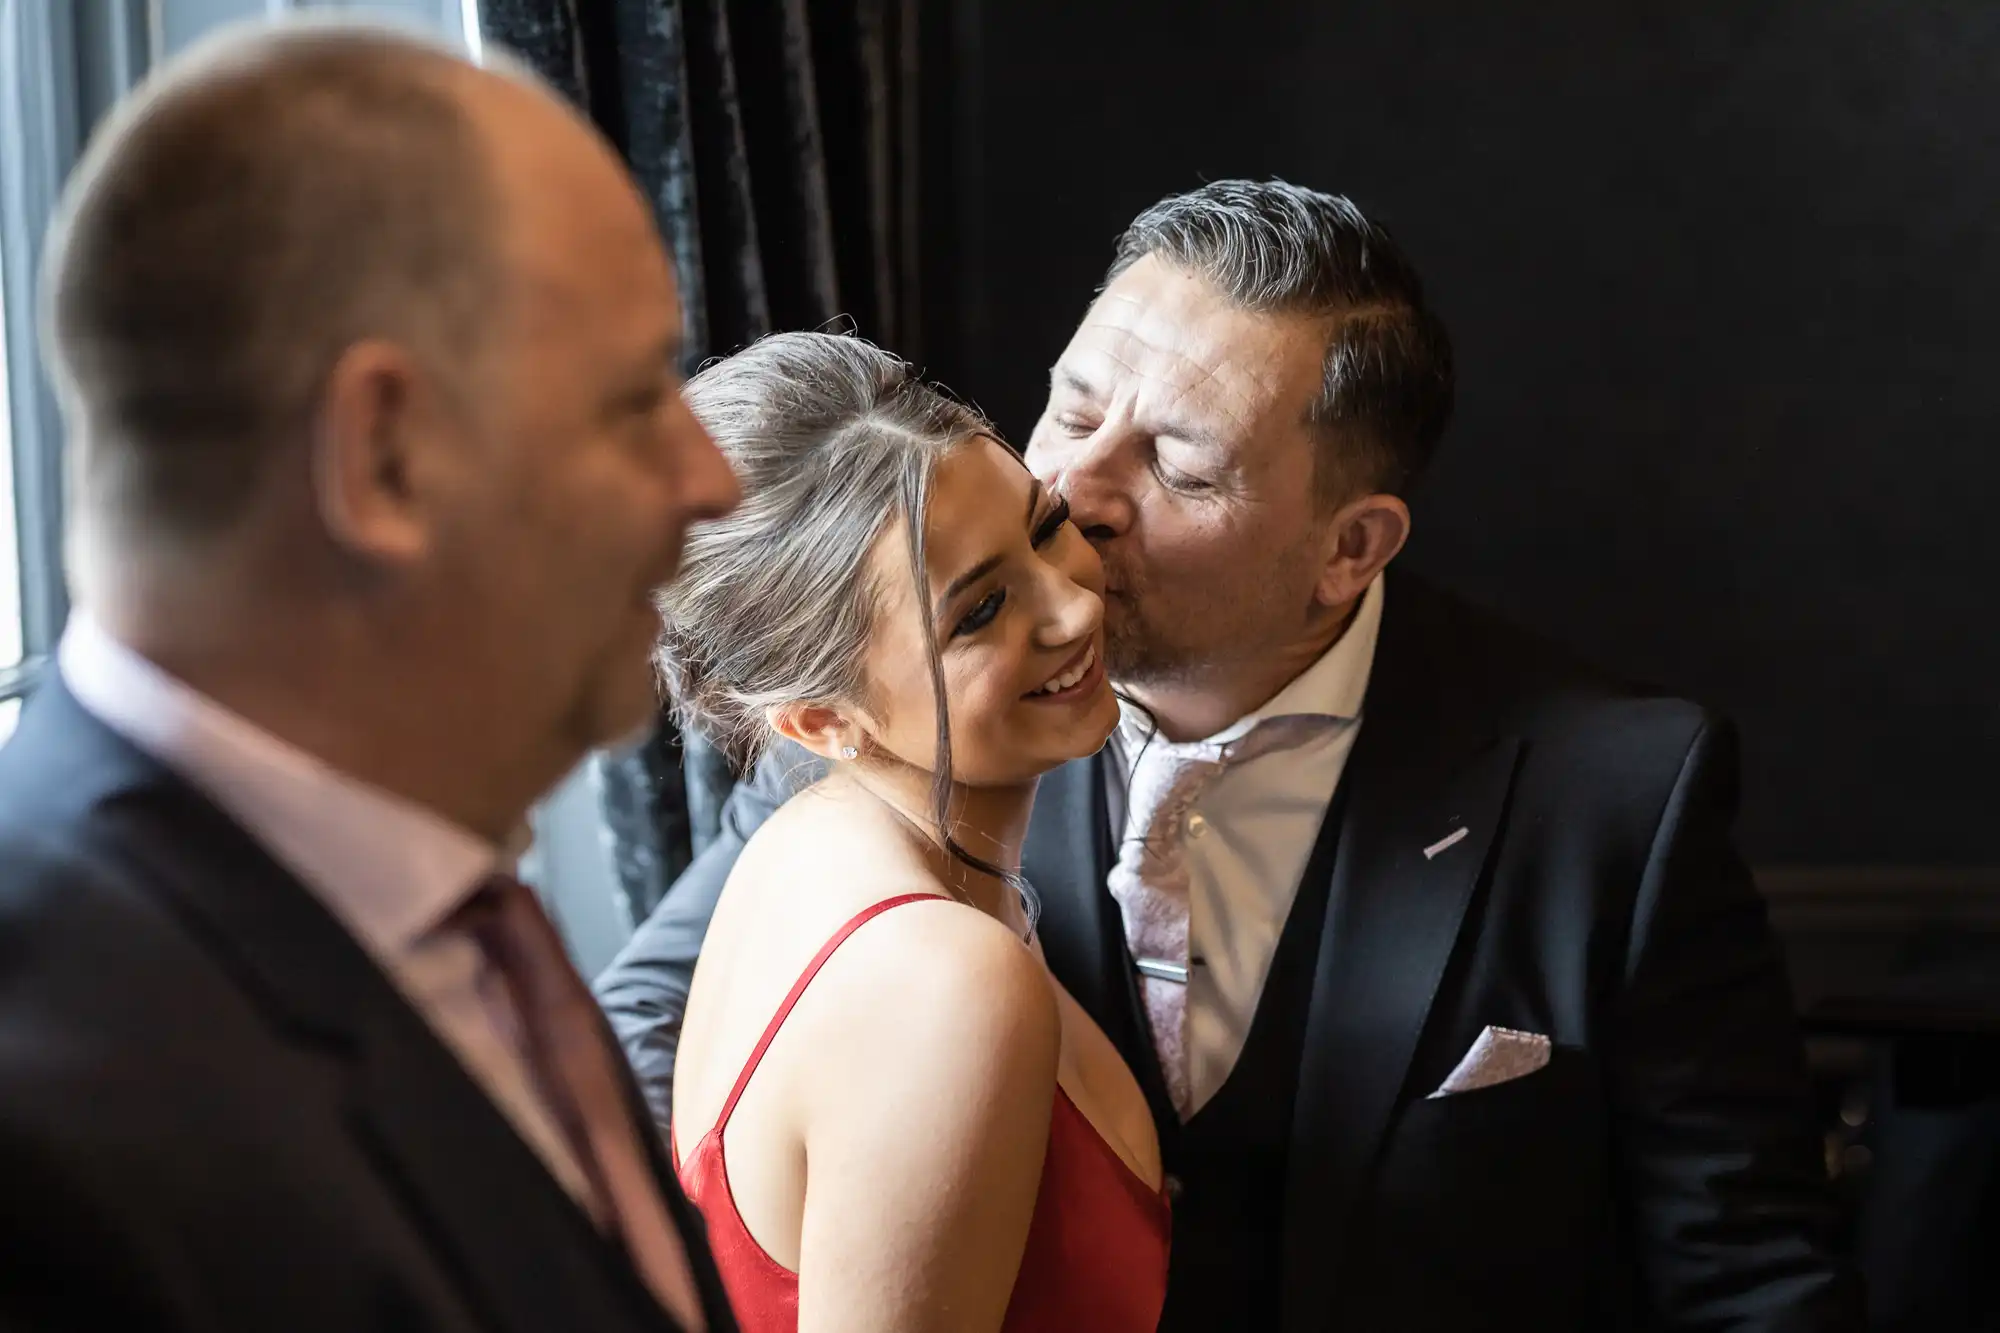 Three people in formal wear: a man on the left, a woman in a red dress smiling as a man in a suit kisses her cheek in an indoor setting.